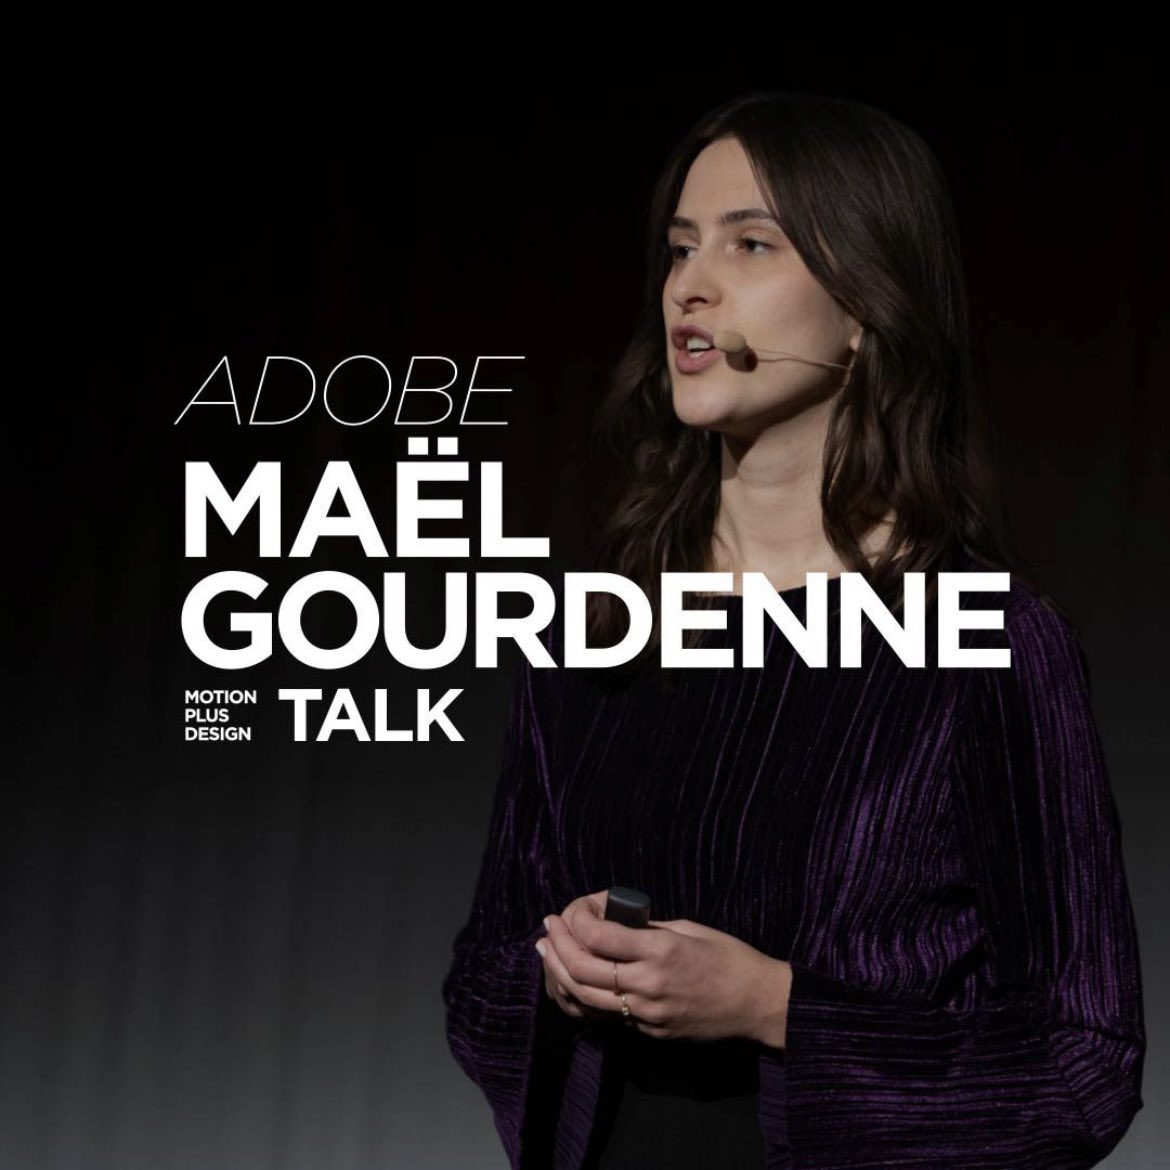 Watch the exclusive talk of #maelgourdenne #adobefrance #substance for free Maël Gourdenne for @AdobeFrance @Substance3D by #motionplusdesign >>> motion-plus-design.com/watch/talks/137 #motiondesign #motiongraphics #motiondesigners #motion #graphicdesign #graphisme #motionart #3D